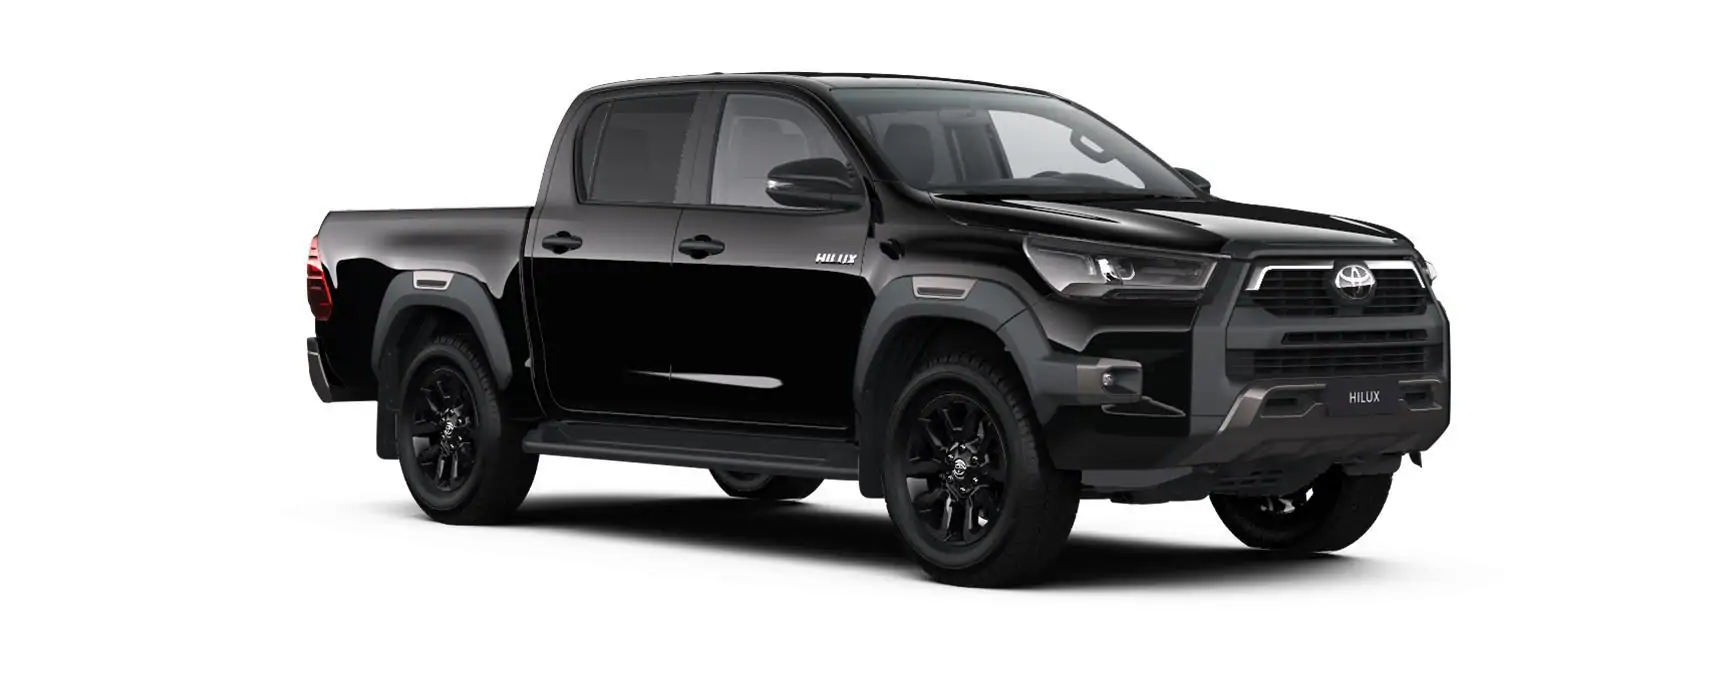 Nieuw Toyota Hilux 4x4 Double Cab 2.8 204hp 6AT Invincible LHD 218 - ATTITUDE BLACK 4